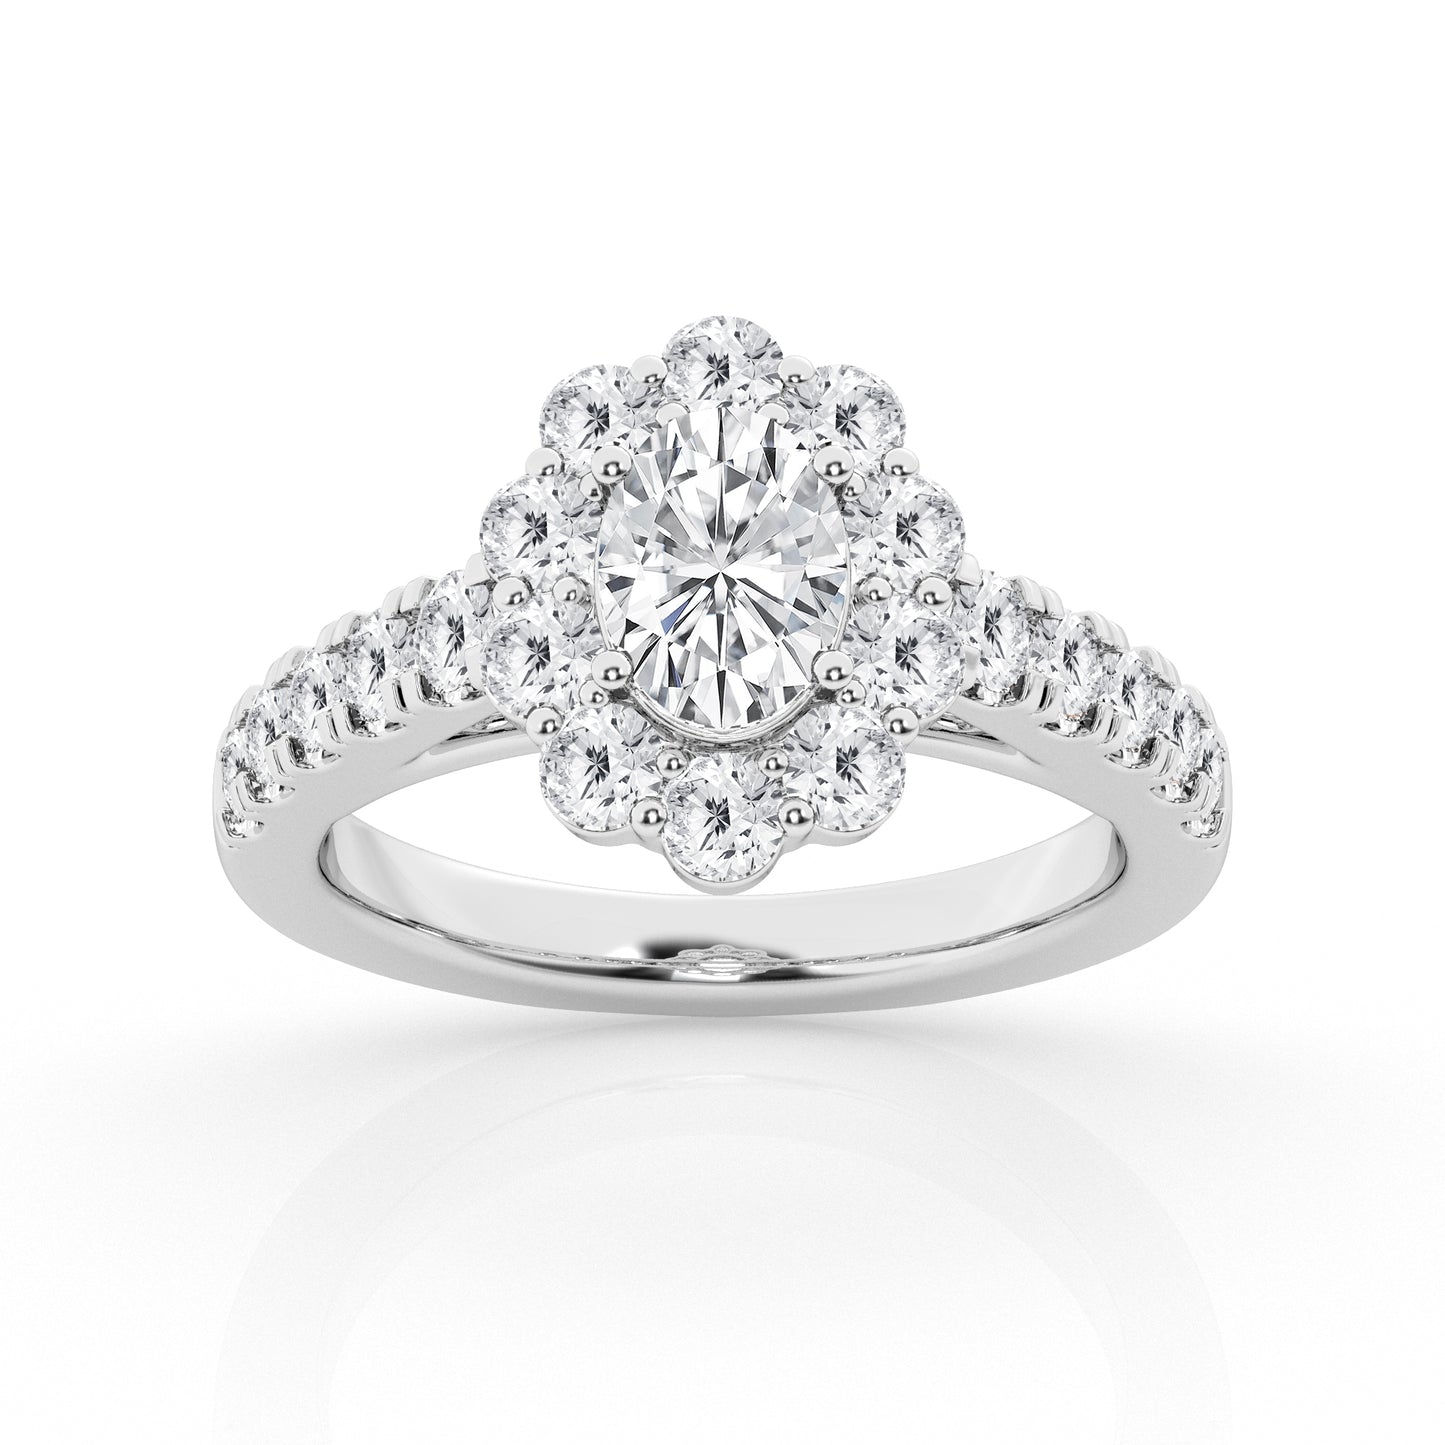 3.00 cttw Halo Bridal Ring with 1.00 ct Oval Center Stone